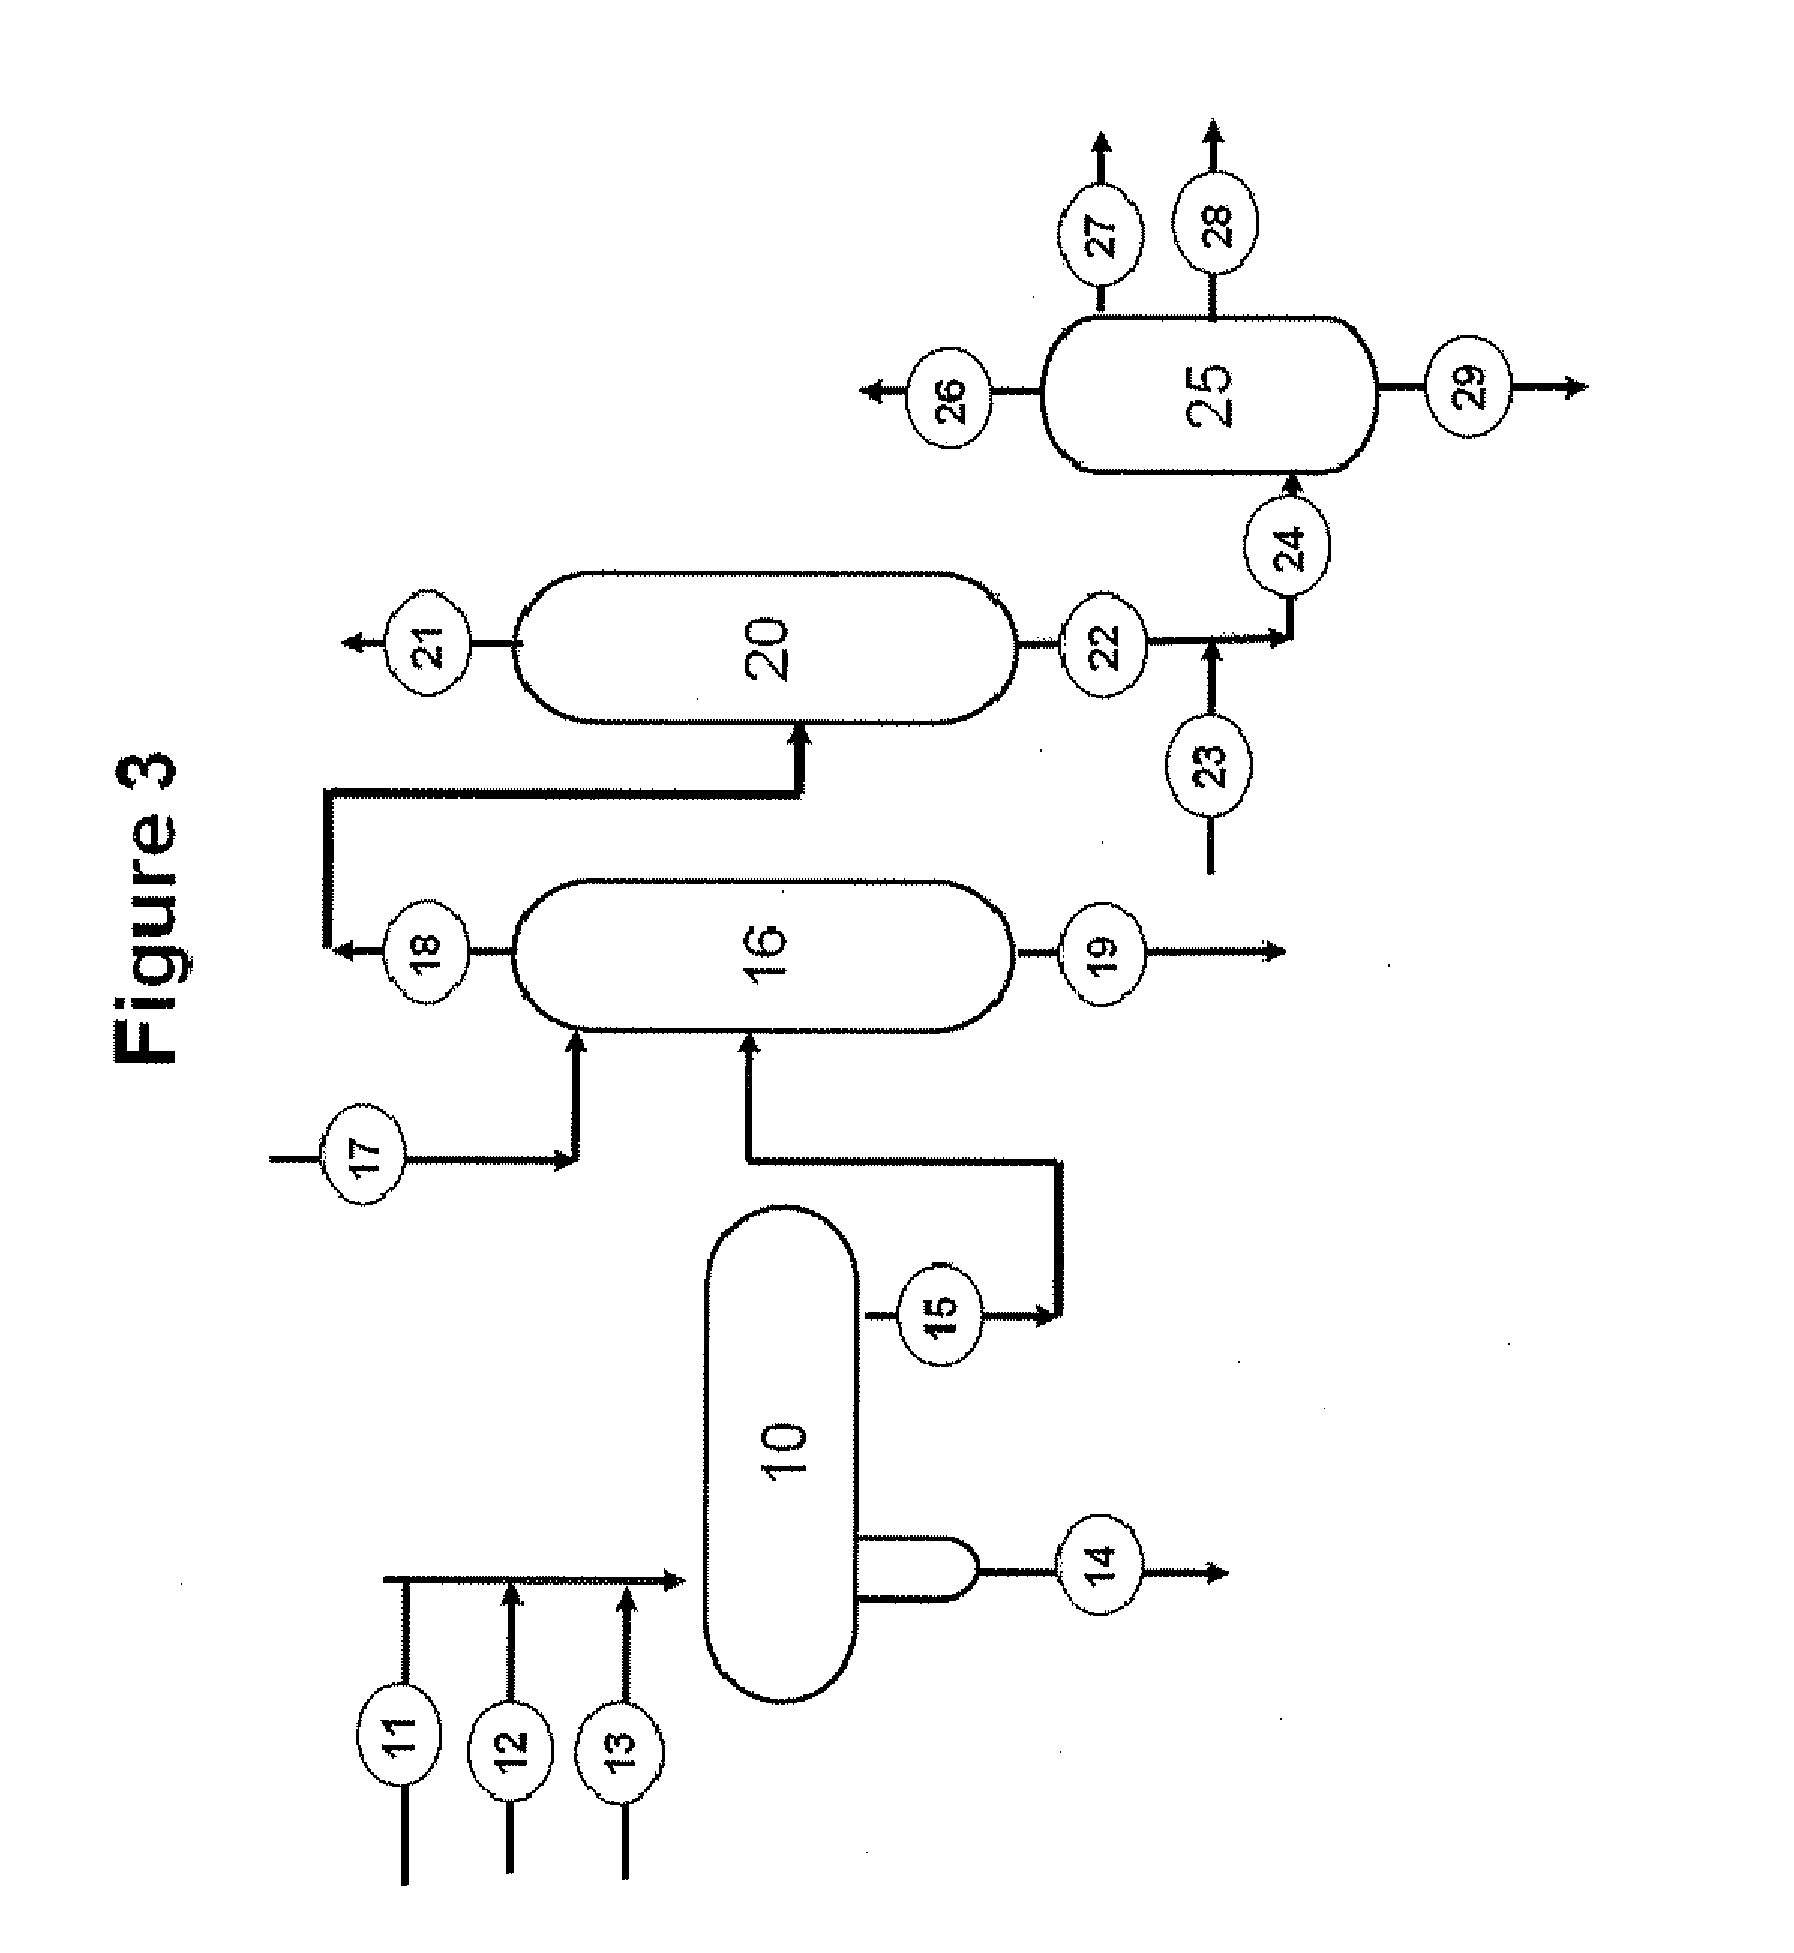 Process for Oxidative Desulfurization and Denitrogenation Using A Fluid Catalytic Cracking (FCC) Unit